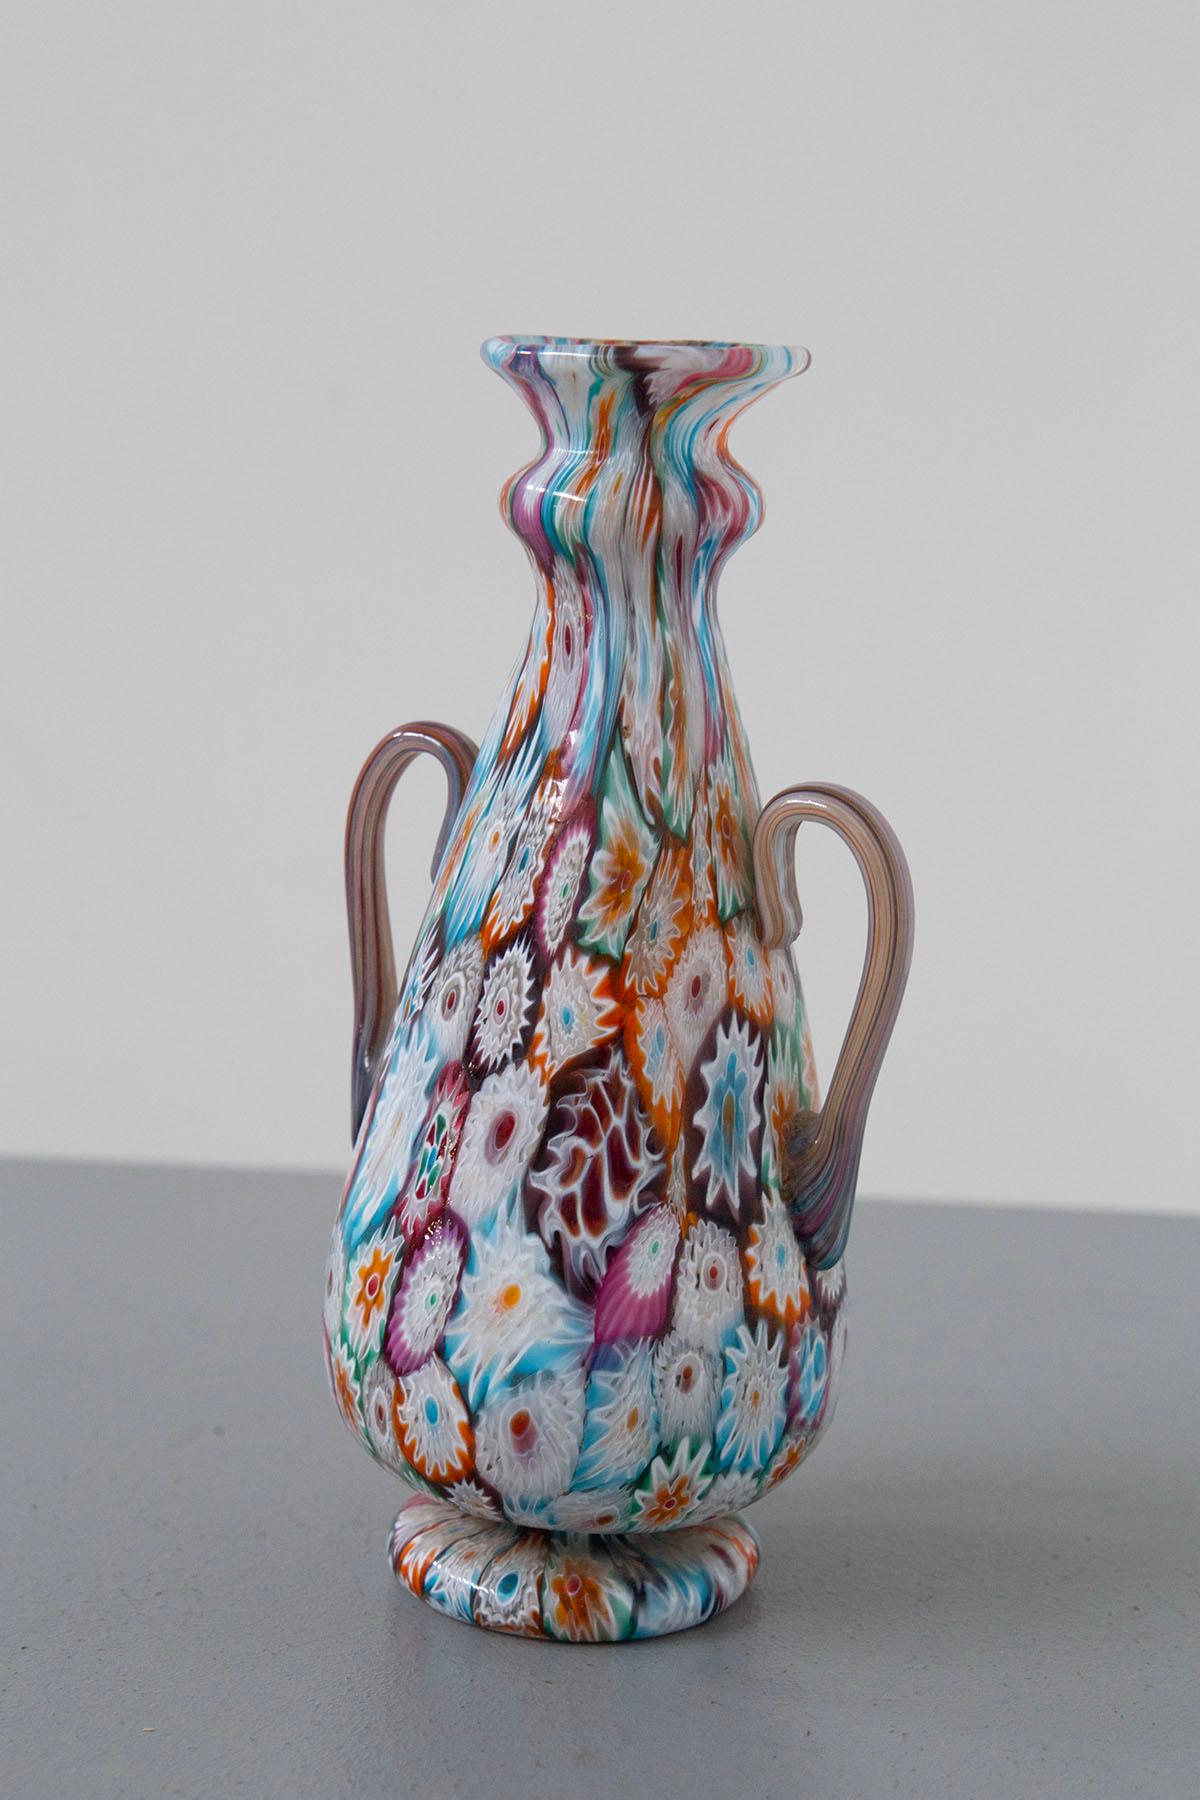 Behold the exquisite grandeur of a decorative vase, a true masterpiece, born from the artistic glassblowing tradition of Murano. This magnificent creation is adorned with a handcrafted mosaic of a thousand flowers, known as 